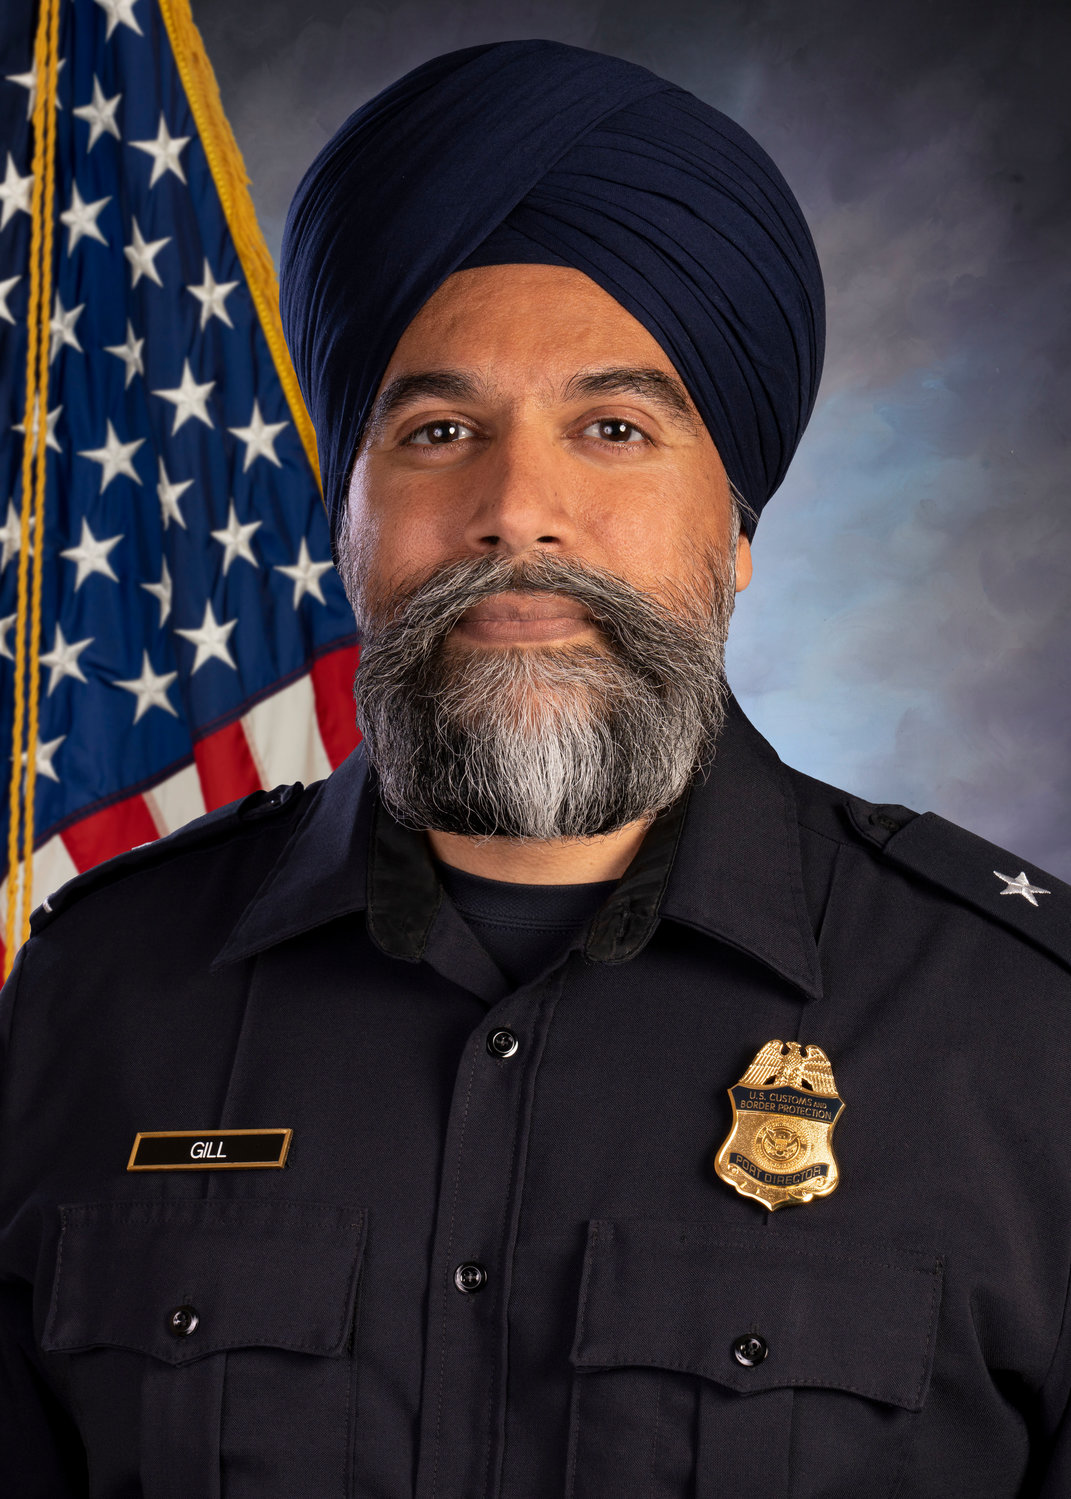 Harmit Gill, Blaine area port director for U.S. Customs and Border Protection was promoted to the position in late March.